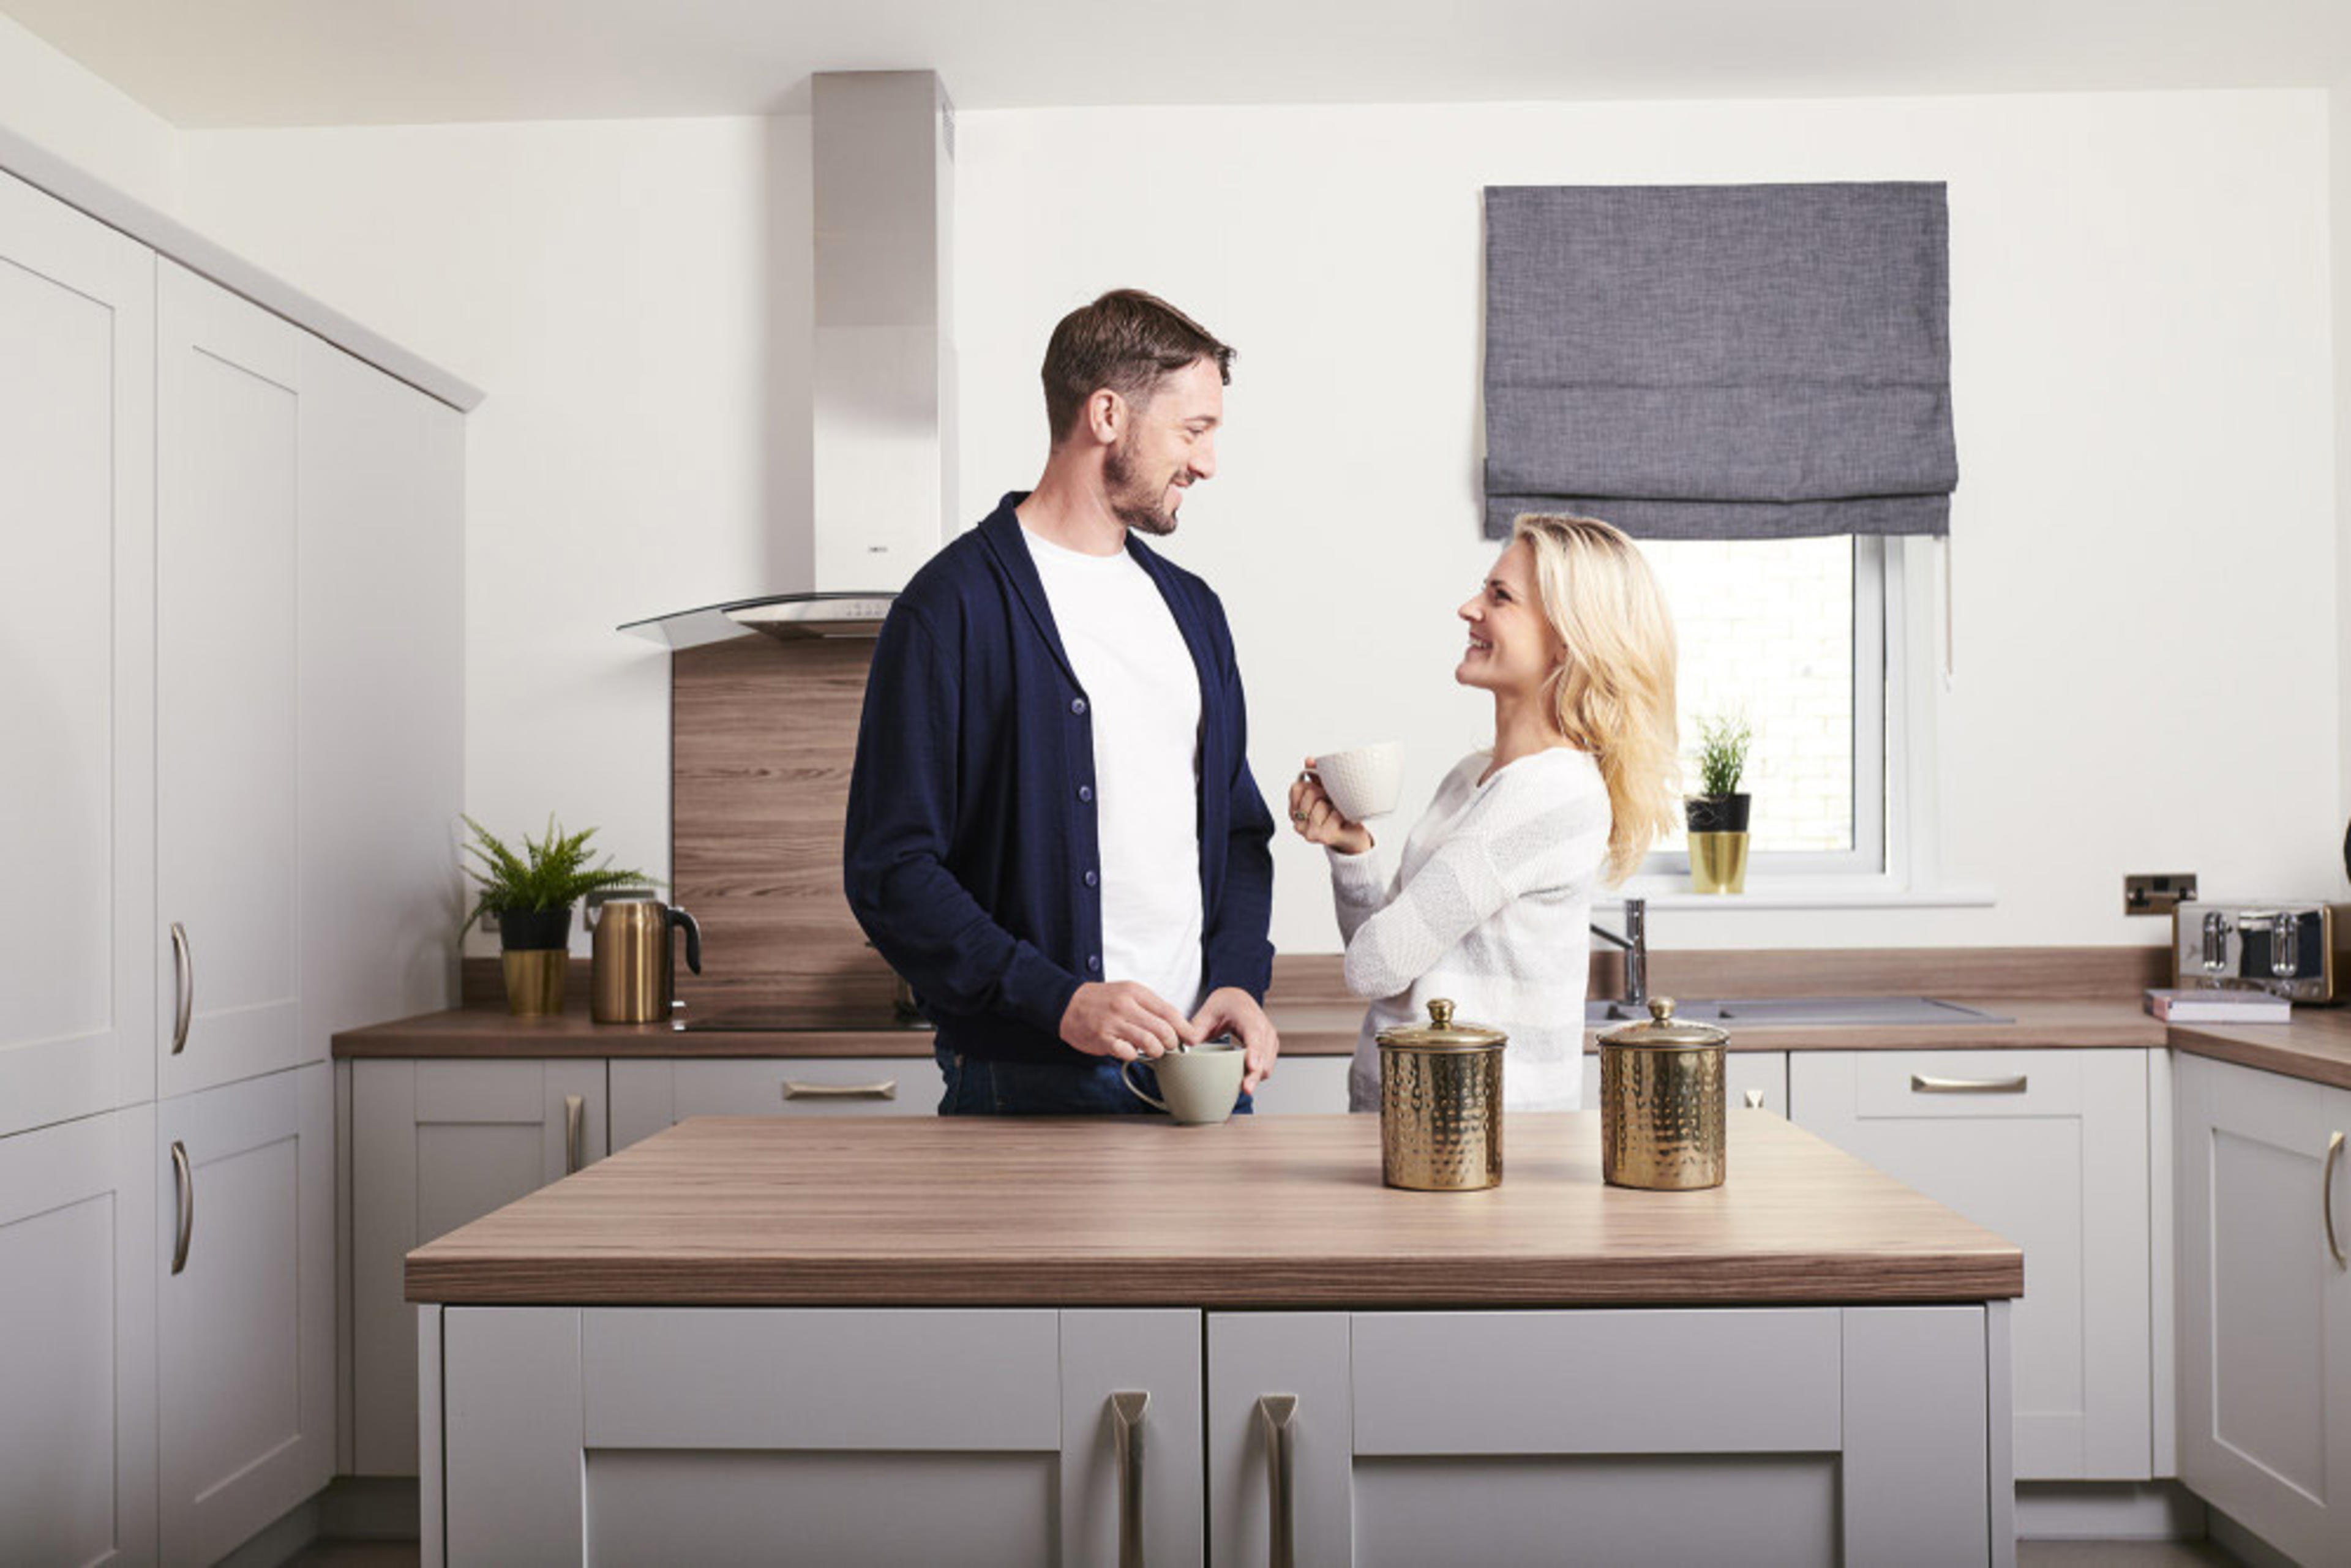 Man and Woman standing drinking coffee at kitchen island